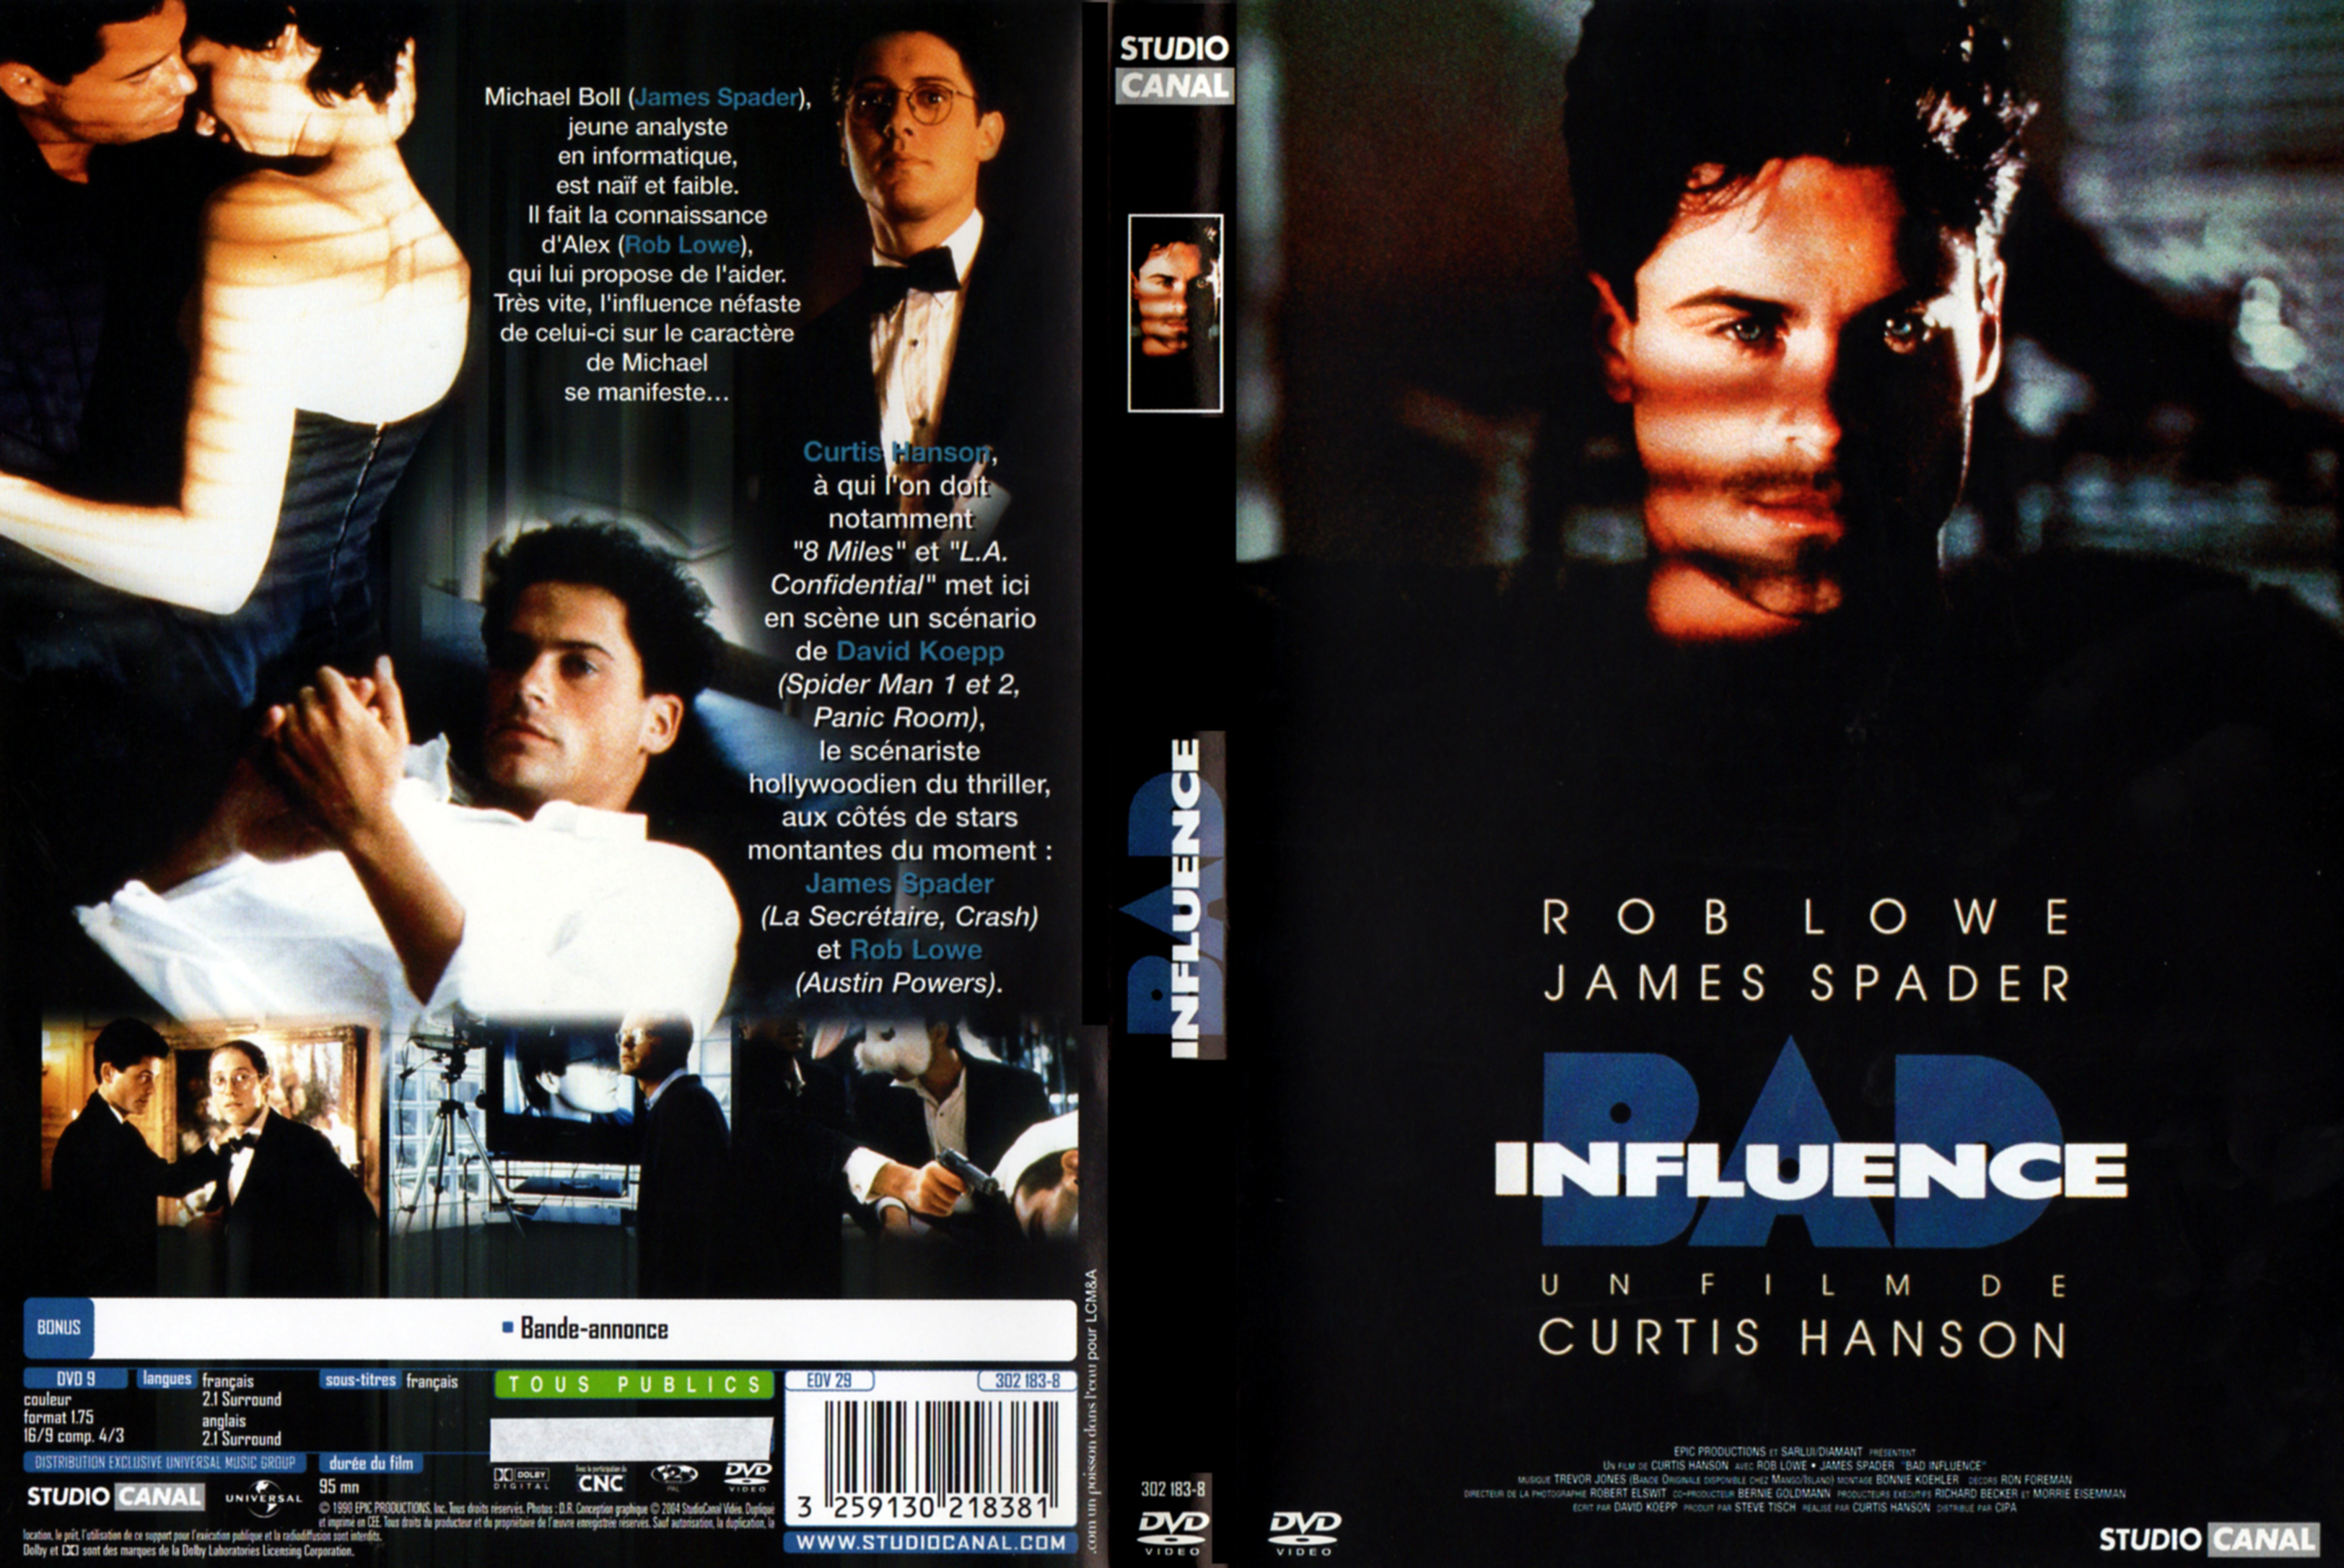 Jaquette DVD Bad influence